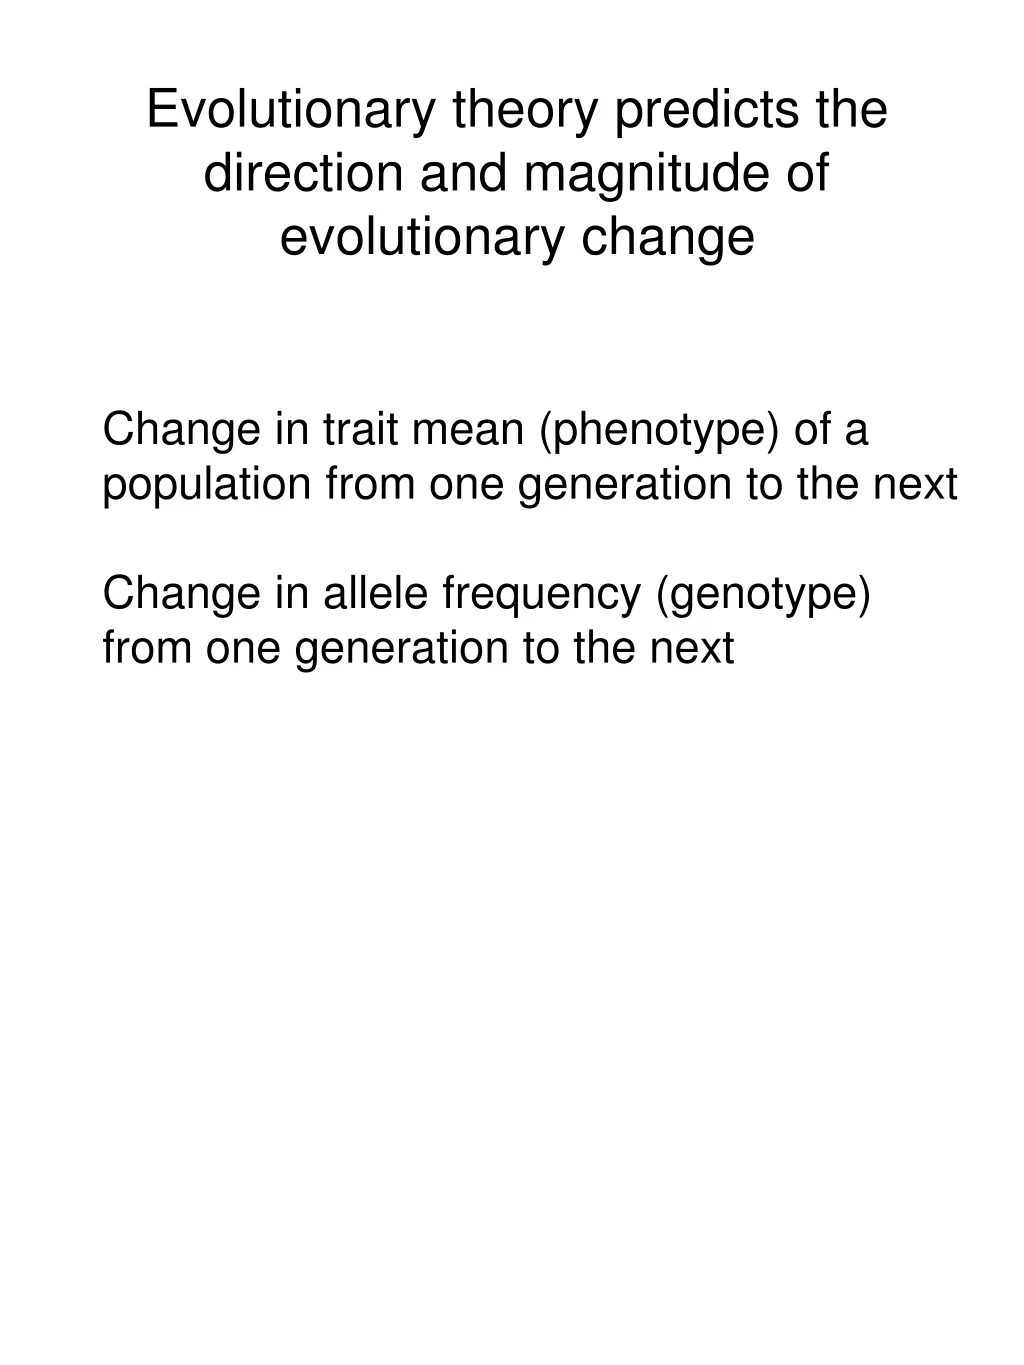 evolutionary theory predicts the direction and magnitude of evolutionary change